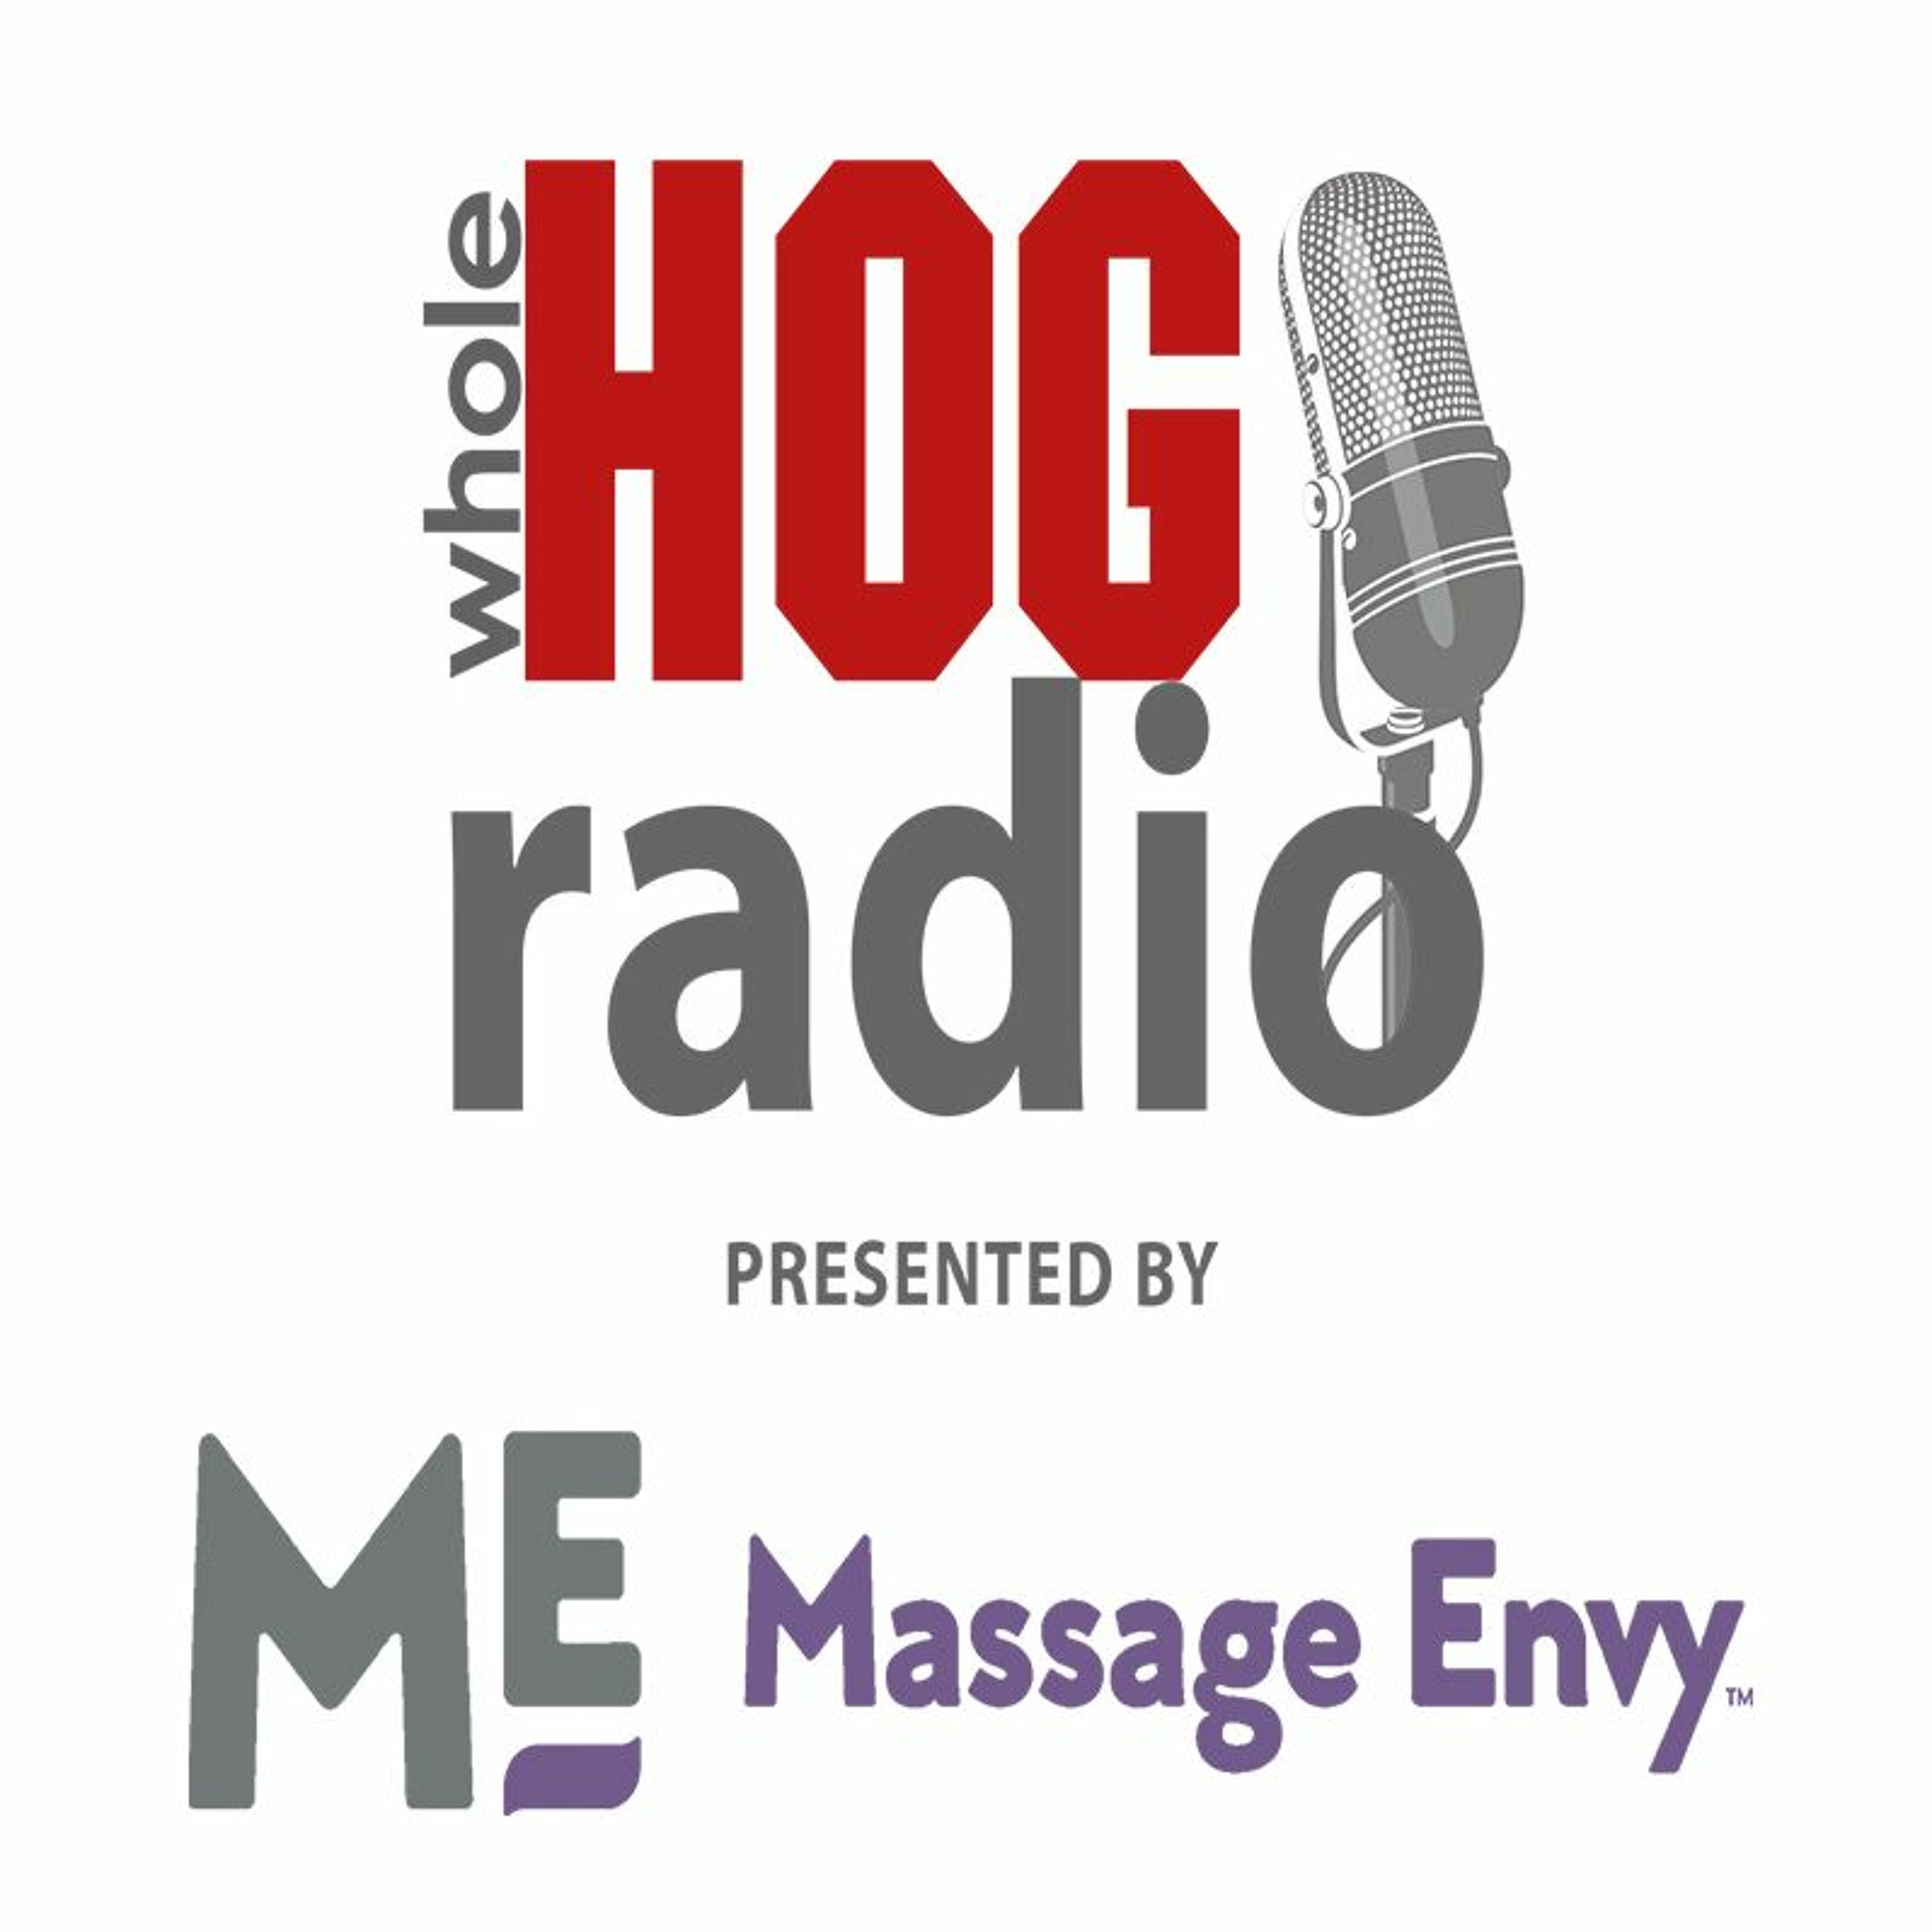 WholeHog Podcast: Barry Lunney Jr. named new coach, Hoop Hogs play defense and recruiting season